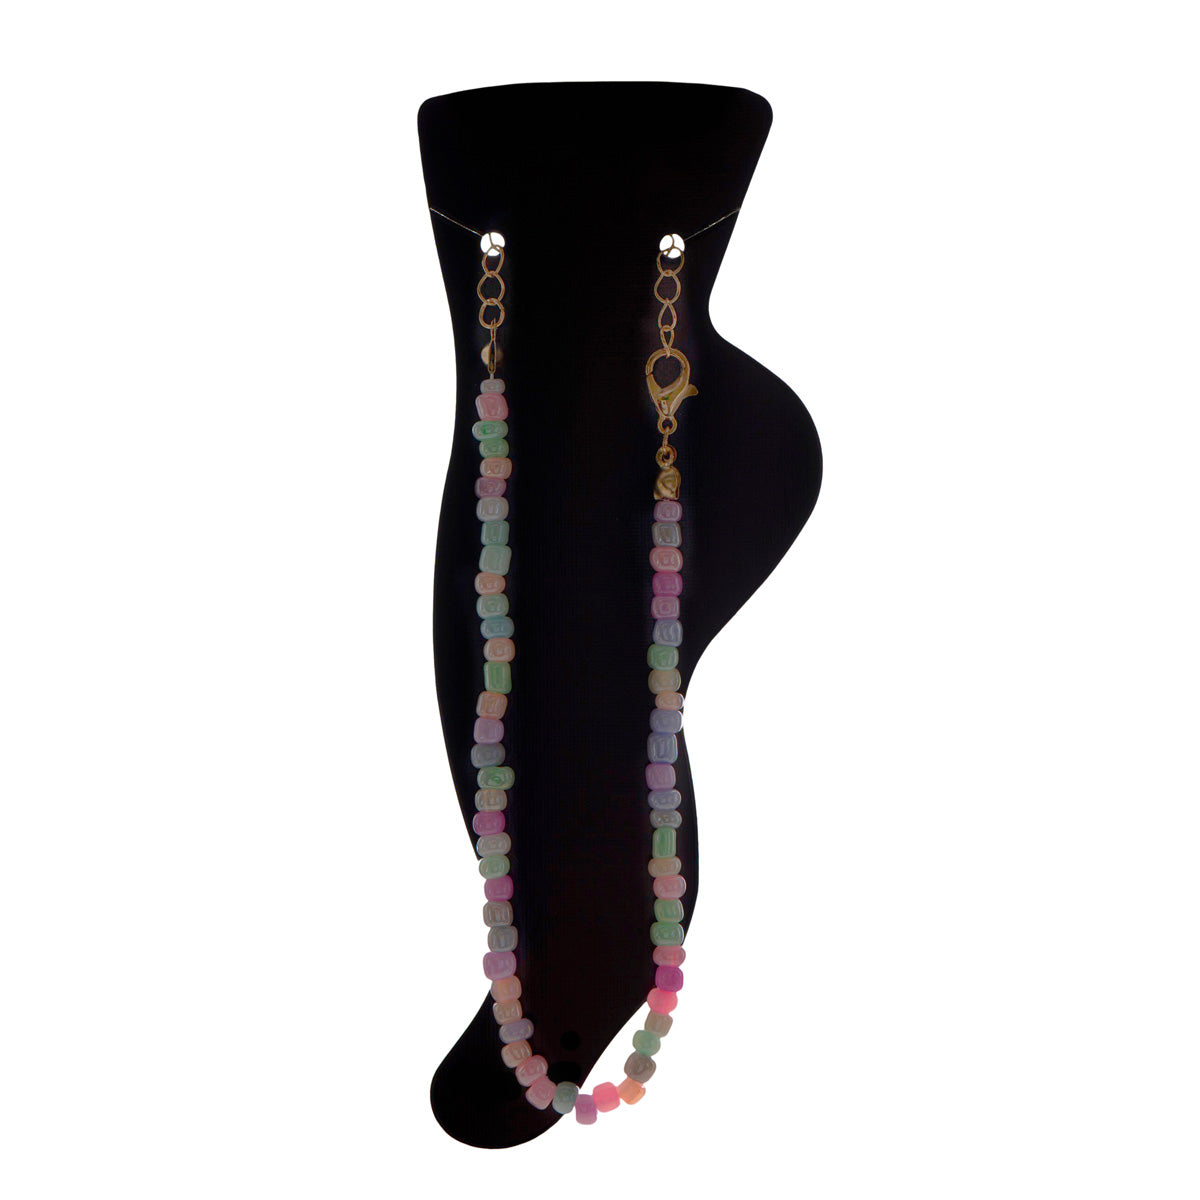 Pearl ankle chain ankle jewelry